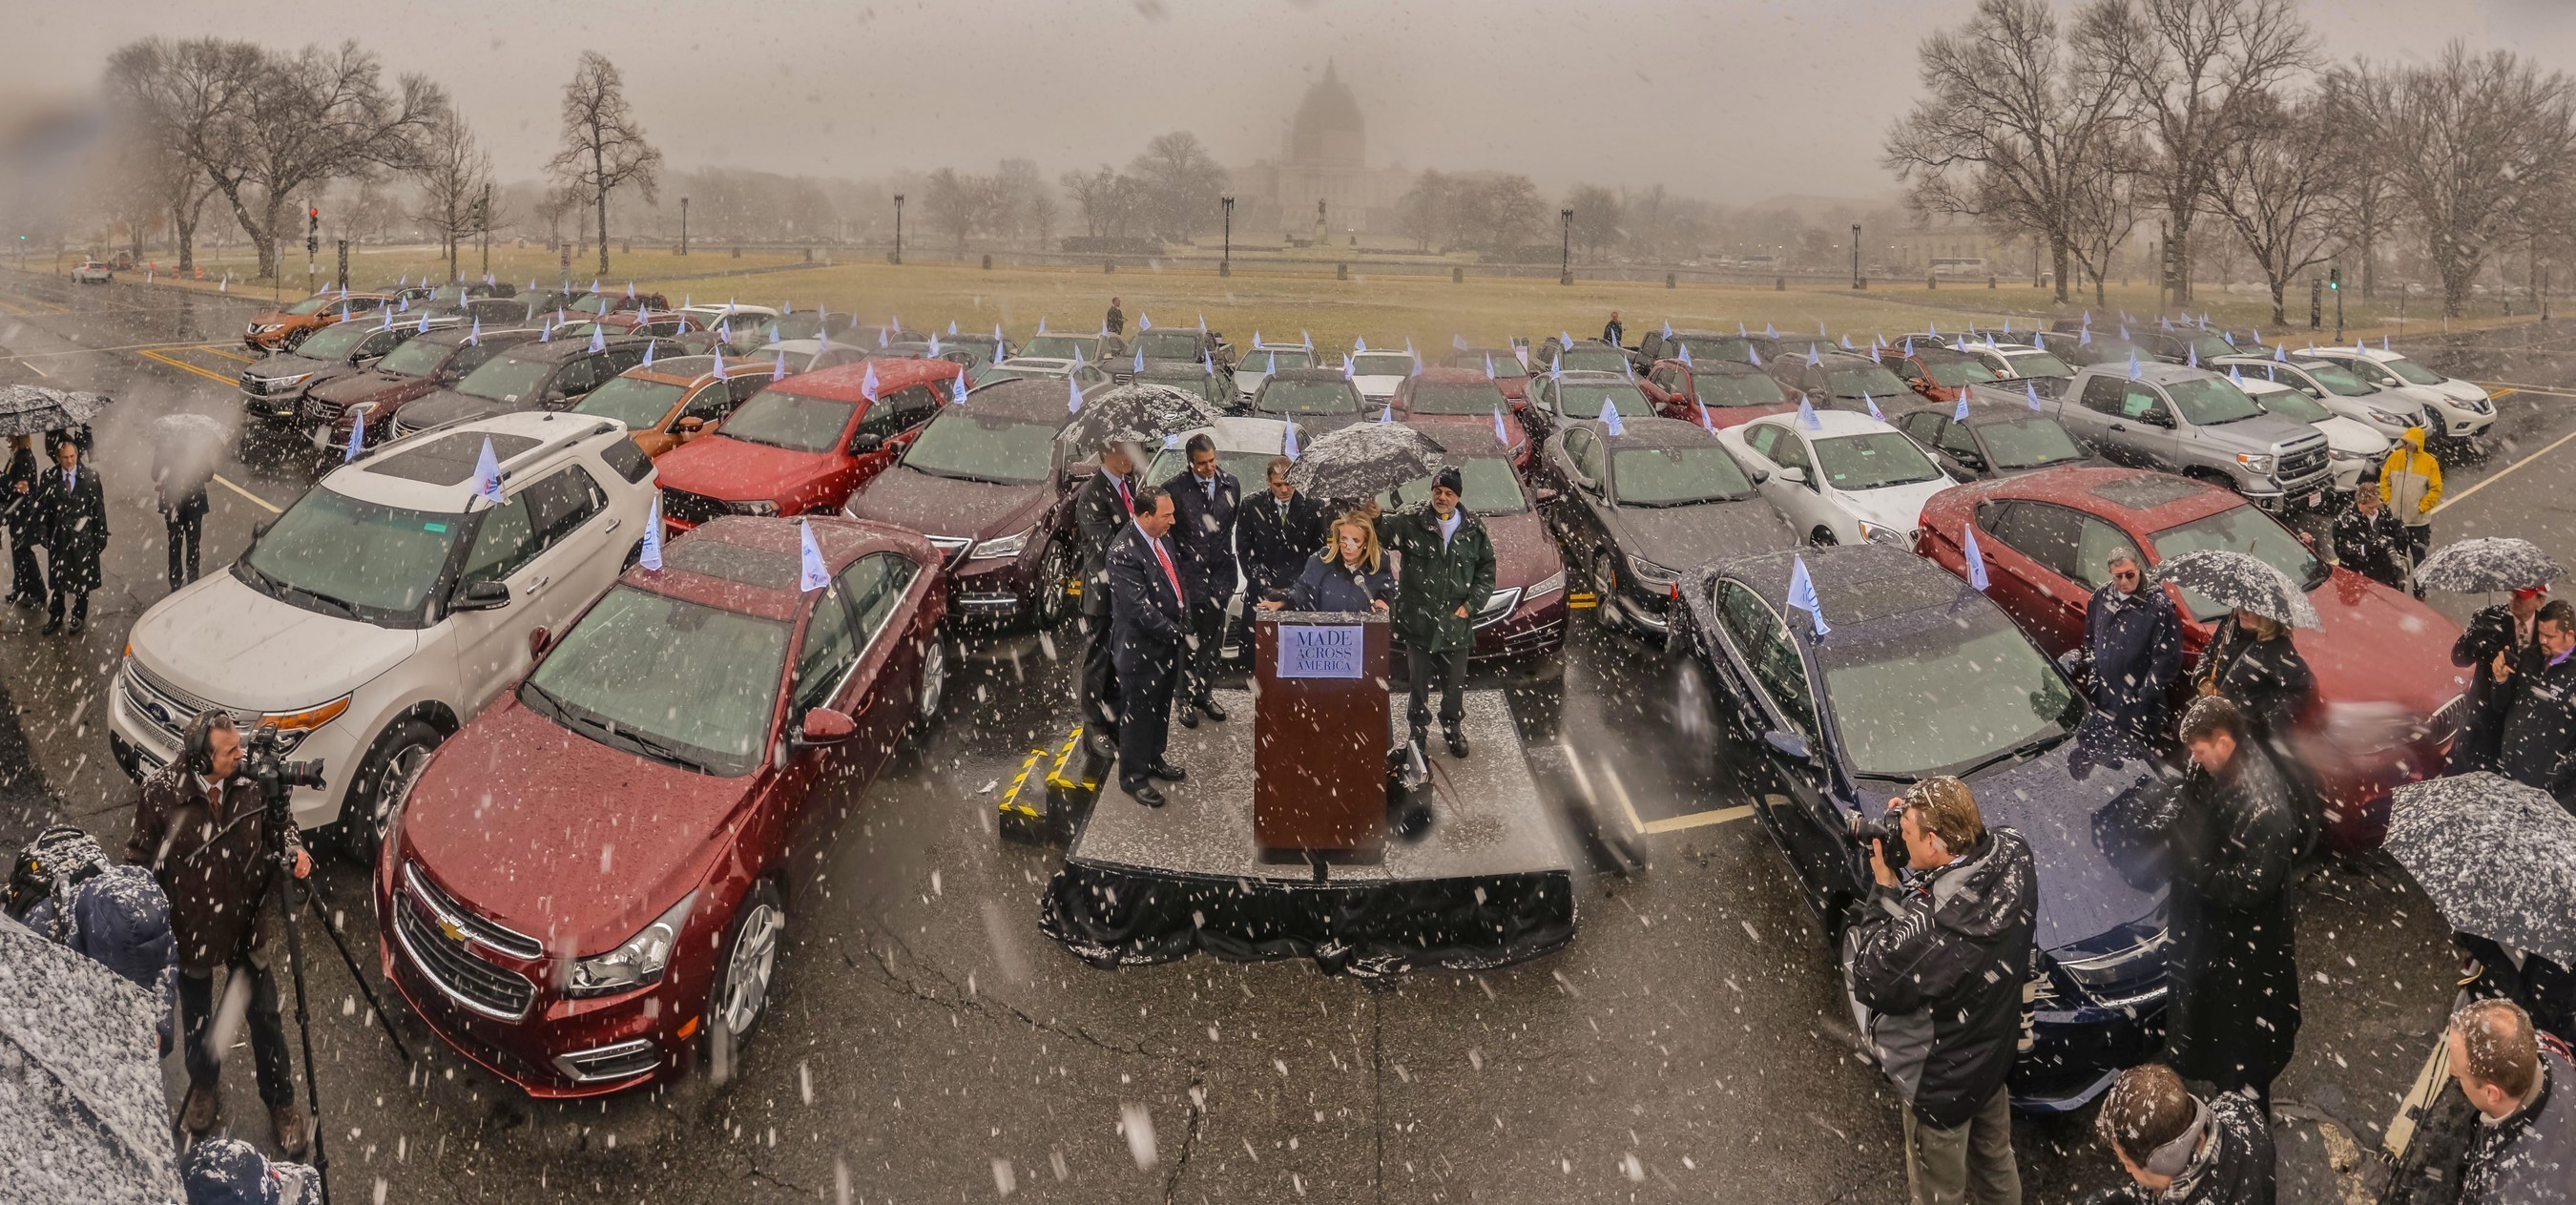 Reps. Debbie Dingell (D-Mich.) and Jim Jordan (R-Ohio) welcome a historic gathering of vehicles Jan. 21 to Capitol Hill at the culmination of "Made Across America," which kicked off the Washington DC Auto Show.